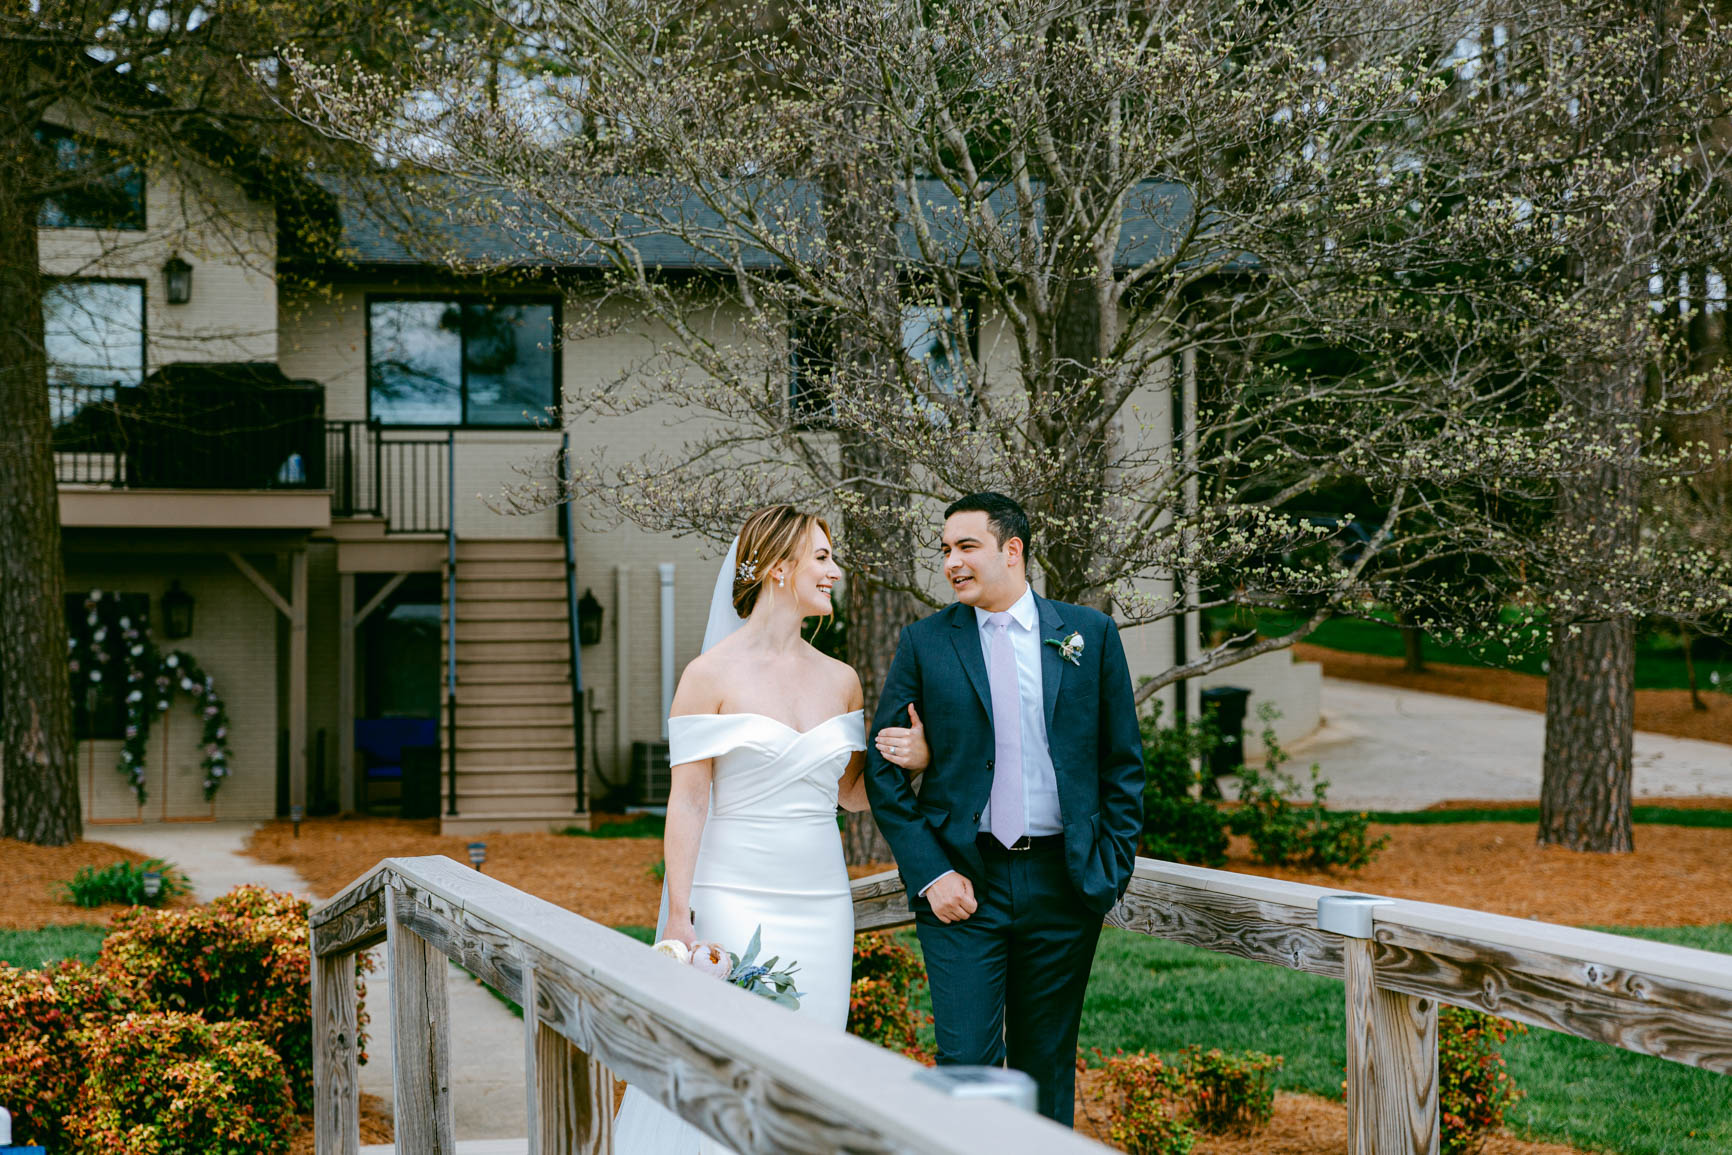 wedding portraits session in Mooresville, NC lake house shot by Nhieu Tang Photography | nhieutang.com